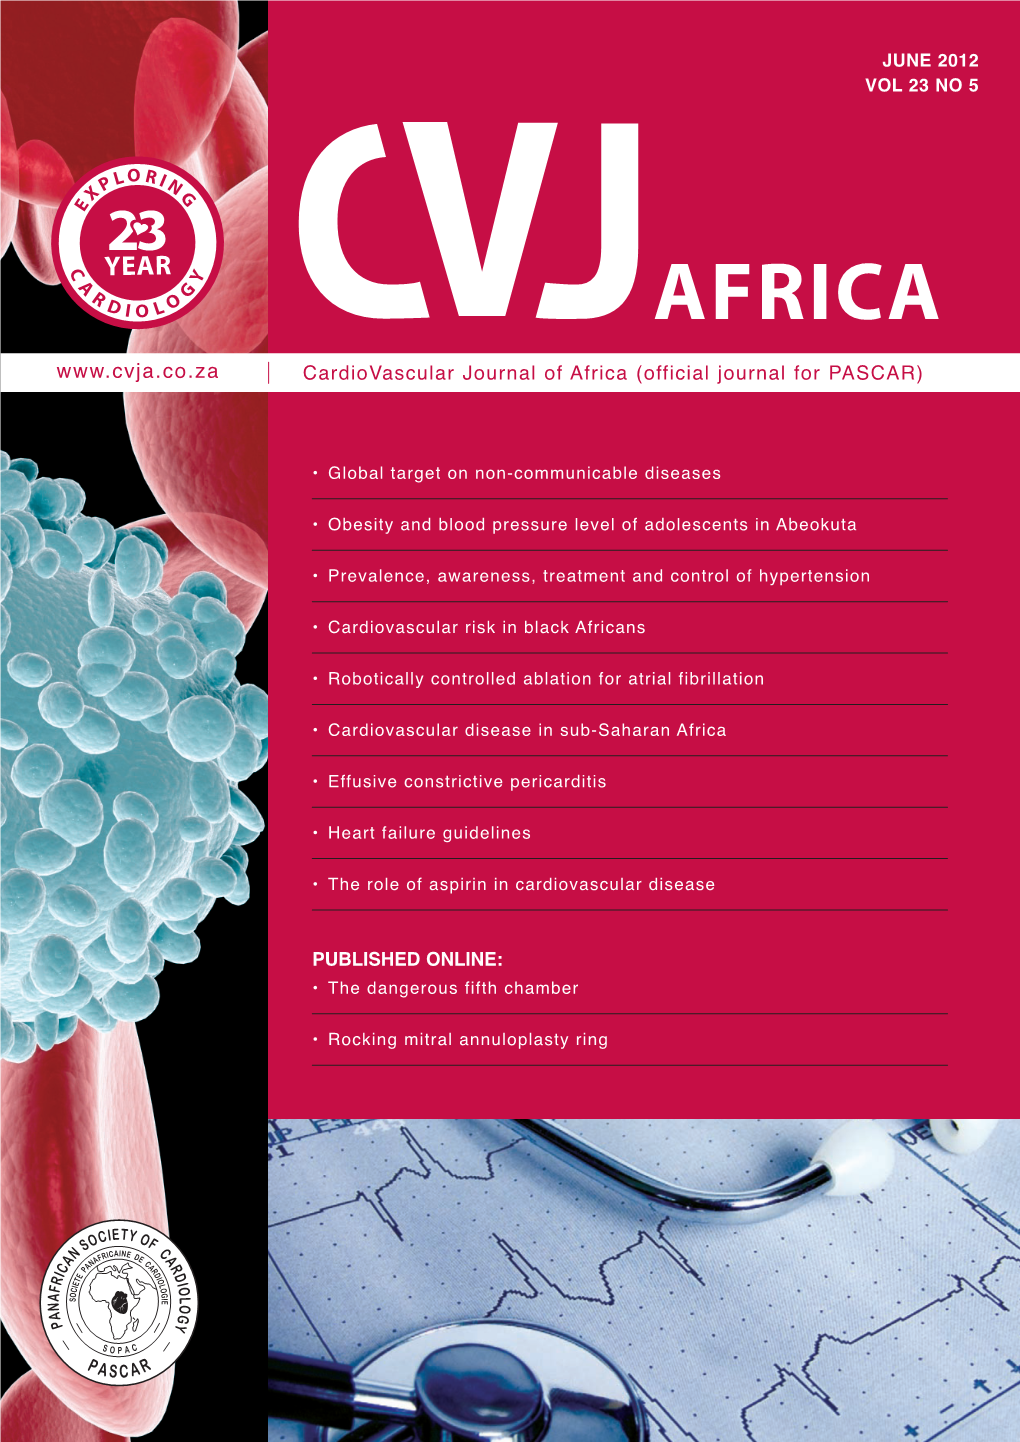 The Cardiovascular Journal of Africa, by the Relevant Control Authorities